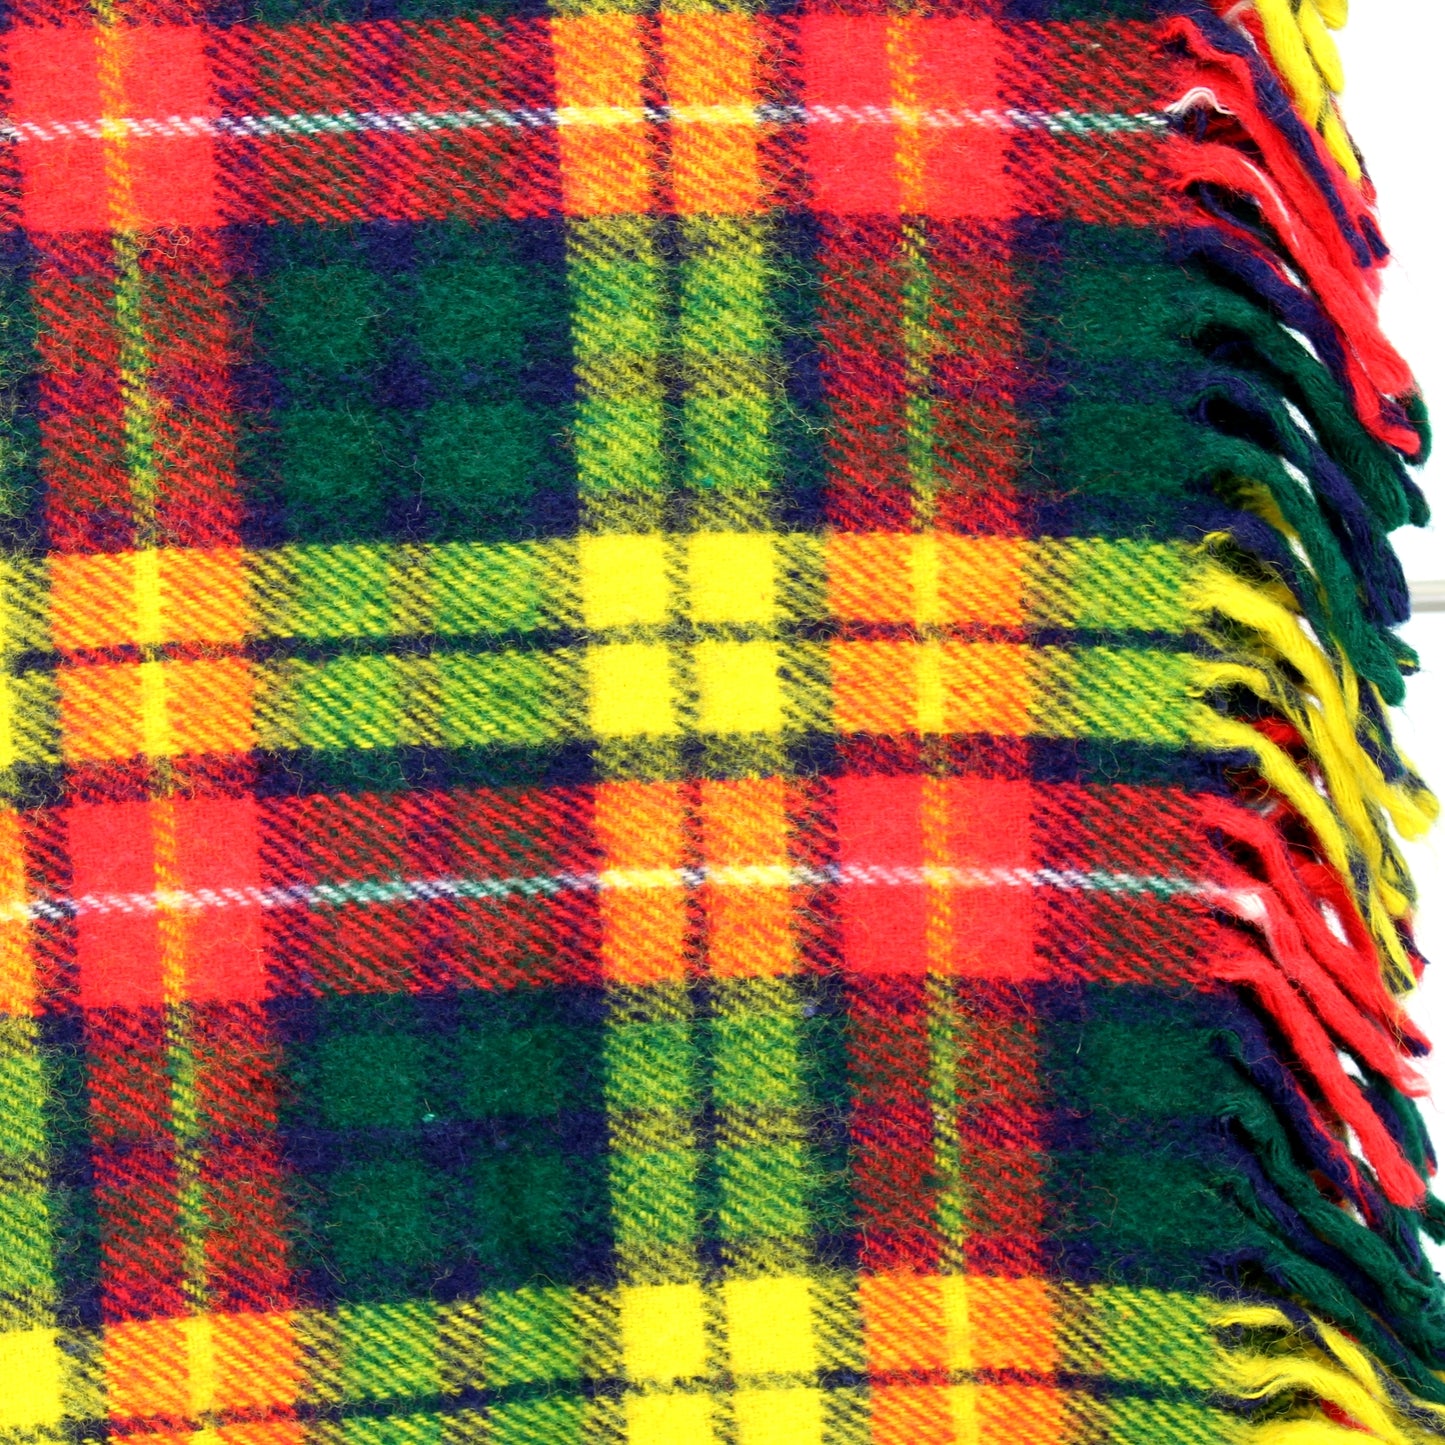 Faribo Classic Wool Throw Blanket Red  Green Yellow Plaid  54" by 52" USA closeup of plaid